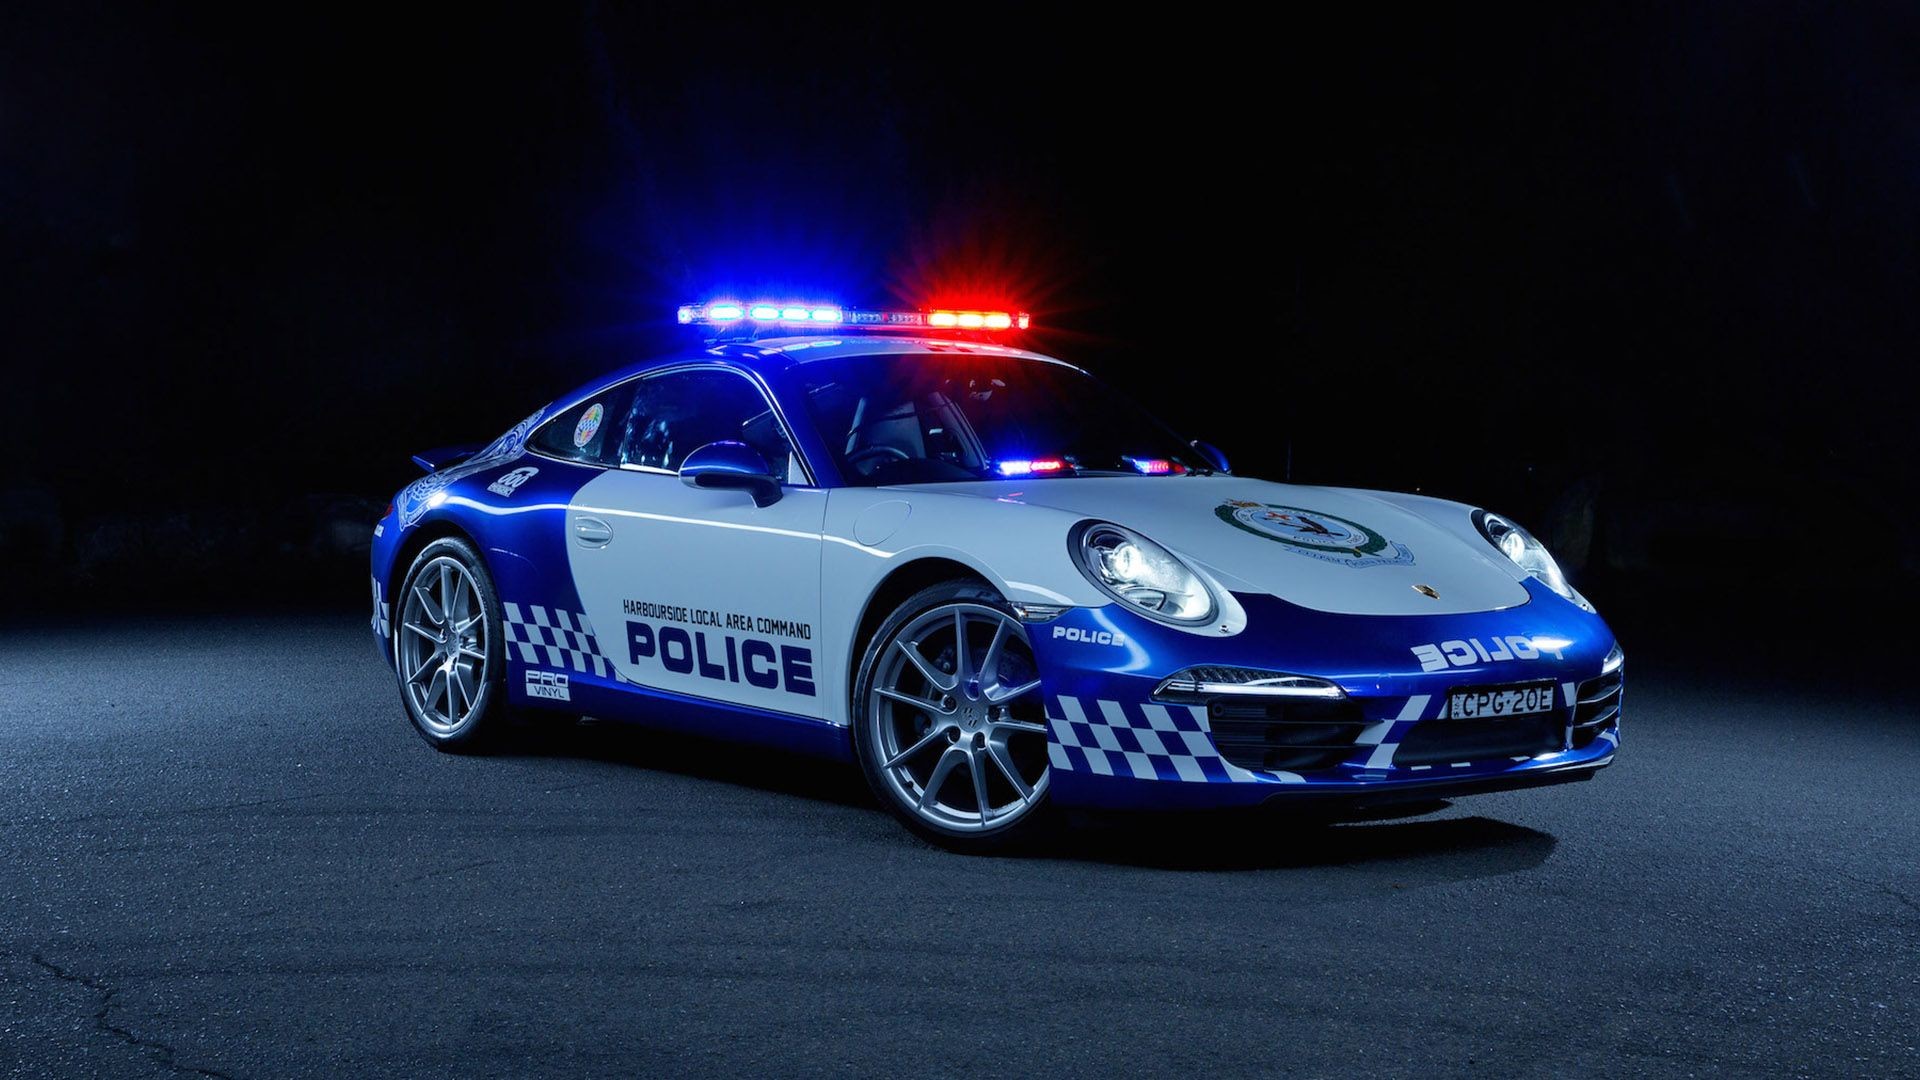 63+ Police Car Wallpaper Backgrounds